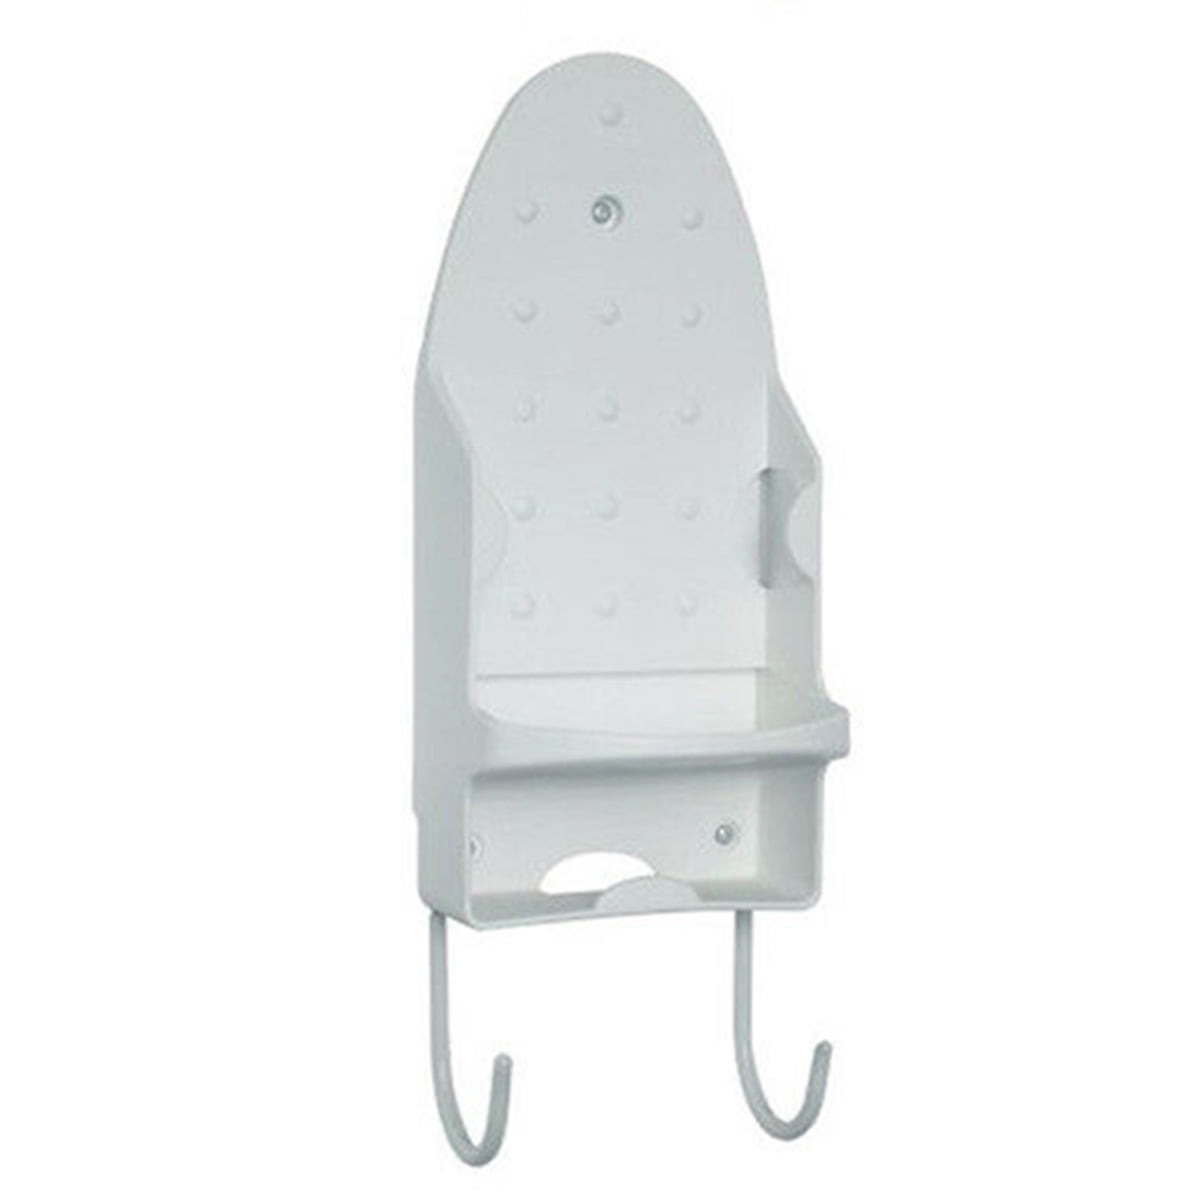 Details about   Laundry Iron Holder Board Ironing Hook Door Wall Mount Home Storage Rack Stand 